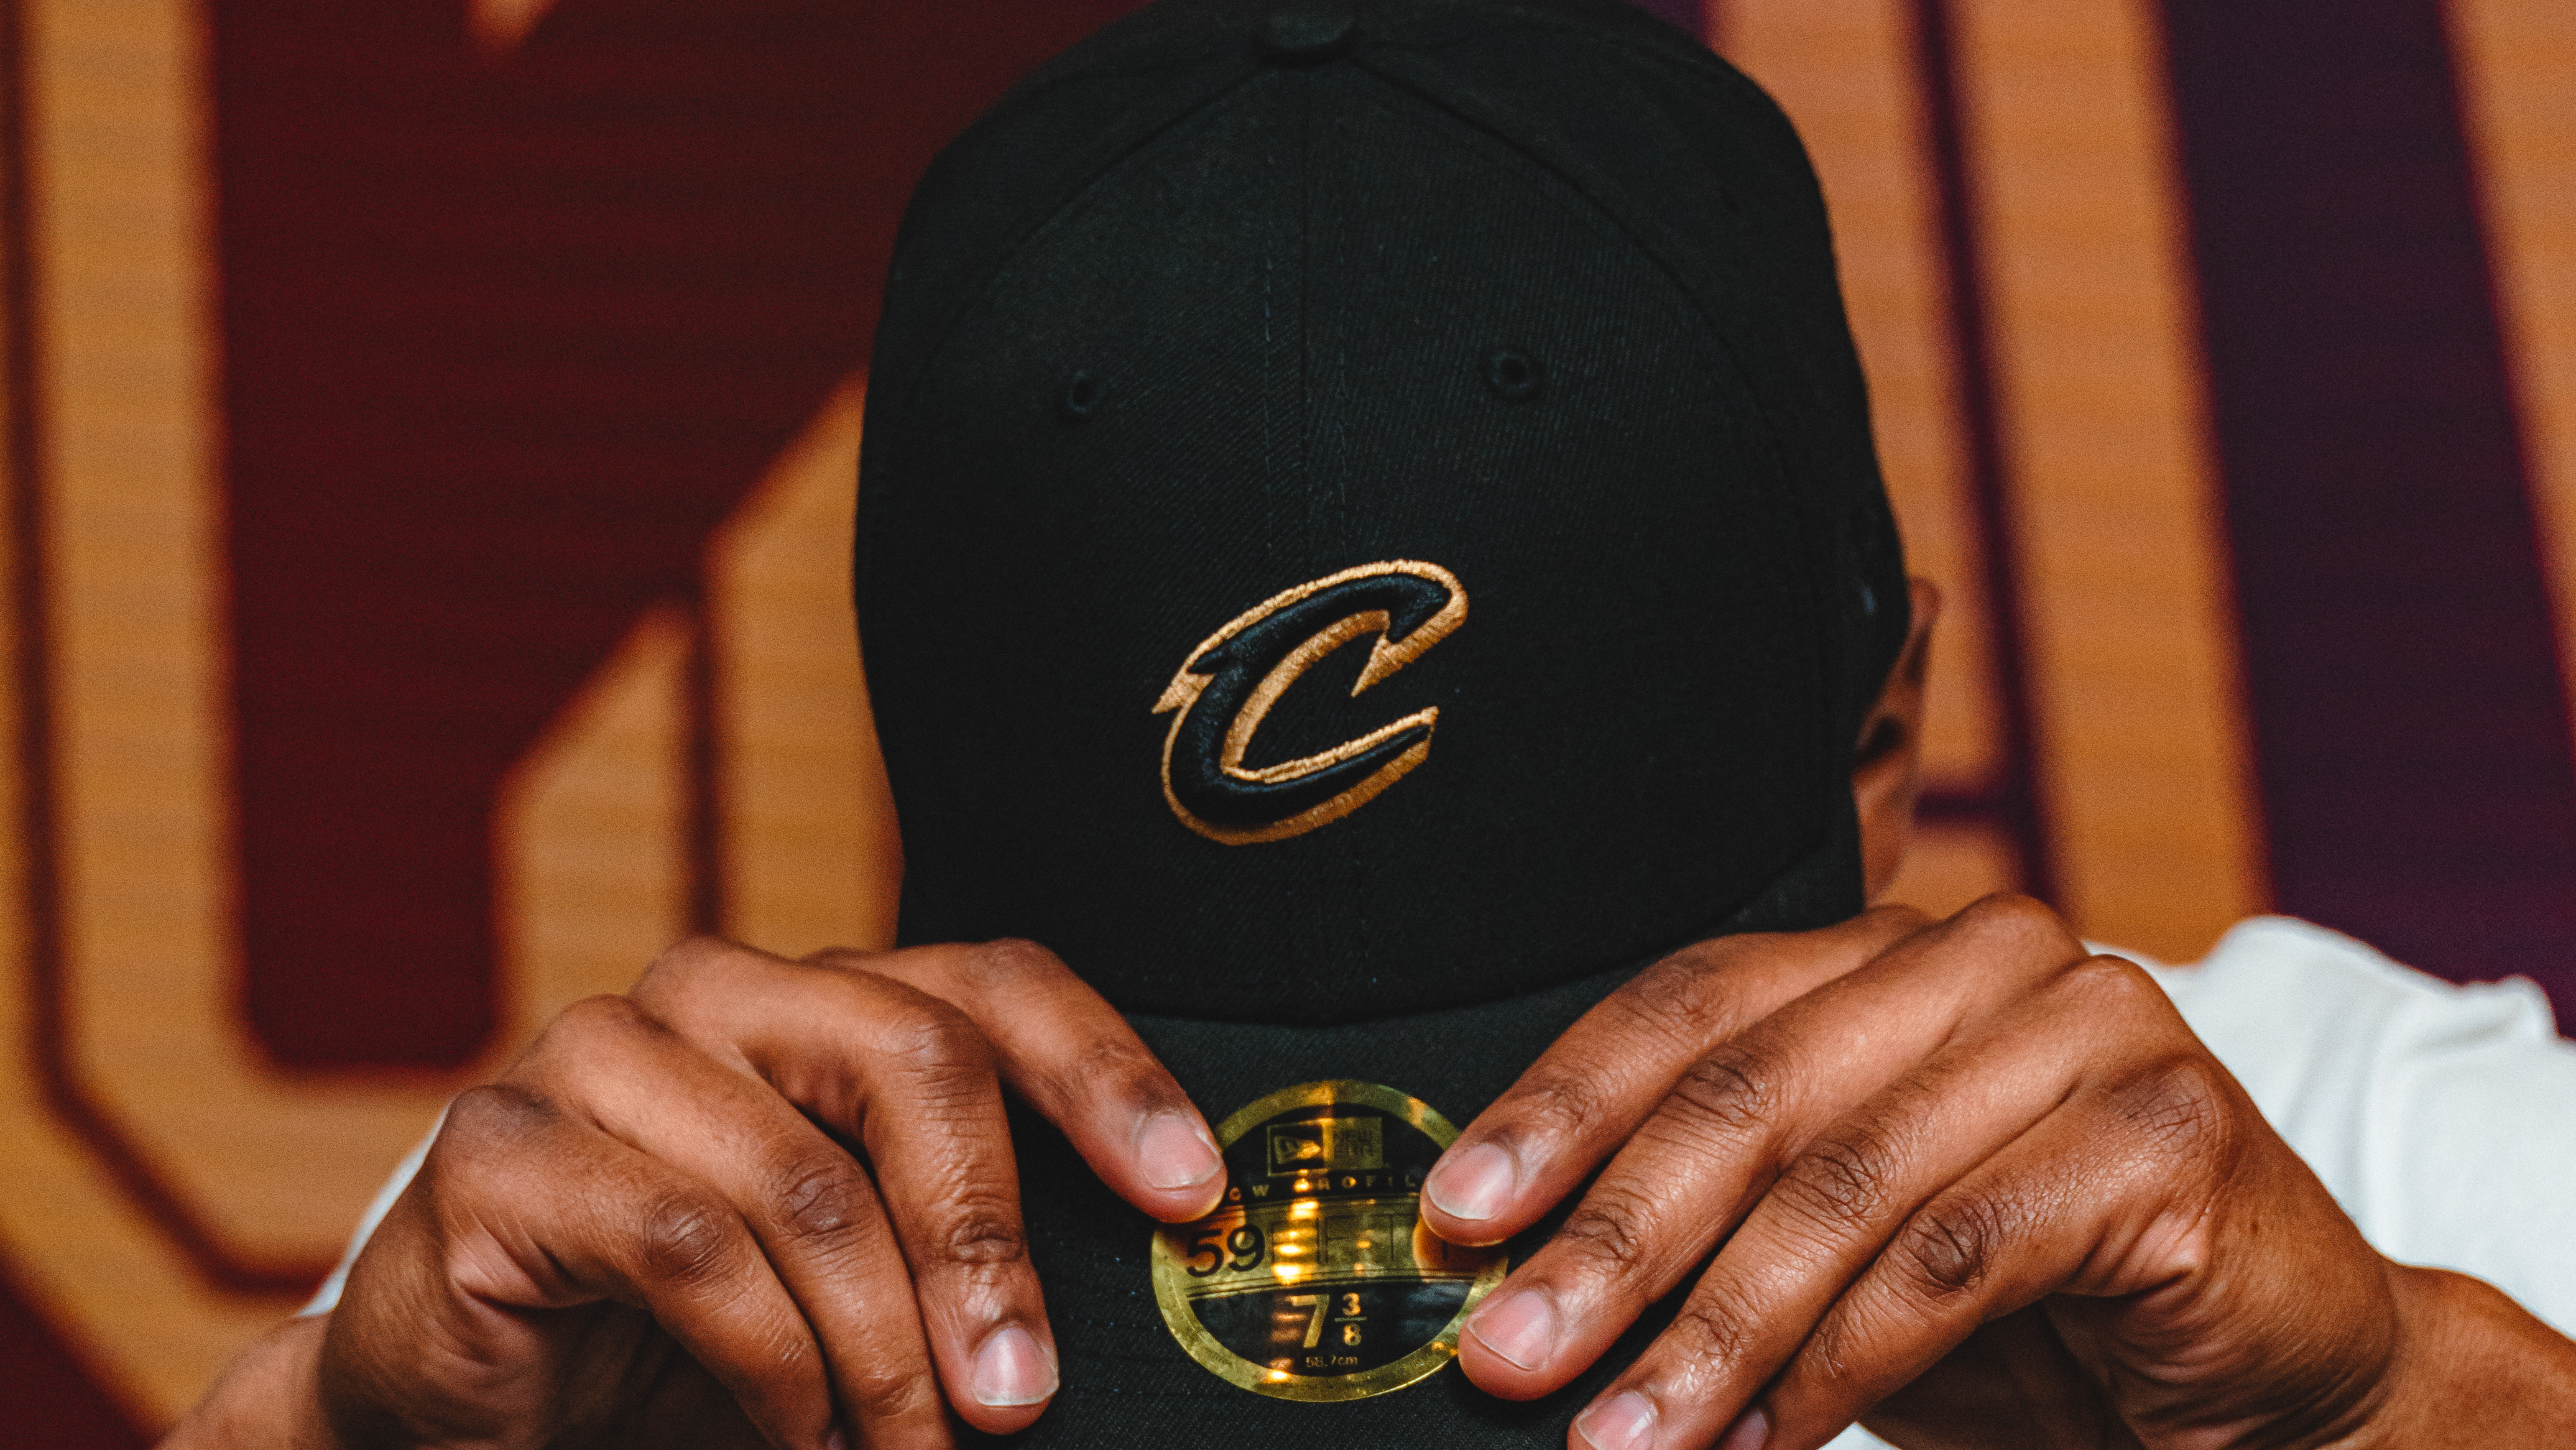 New Cavs logos emphasize gold and wine colors, drops navy